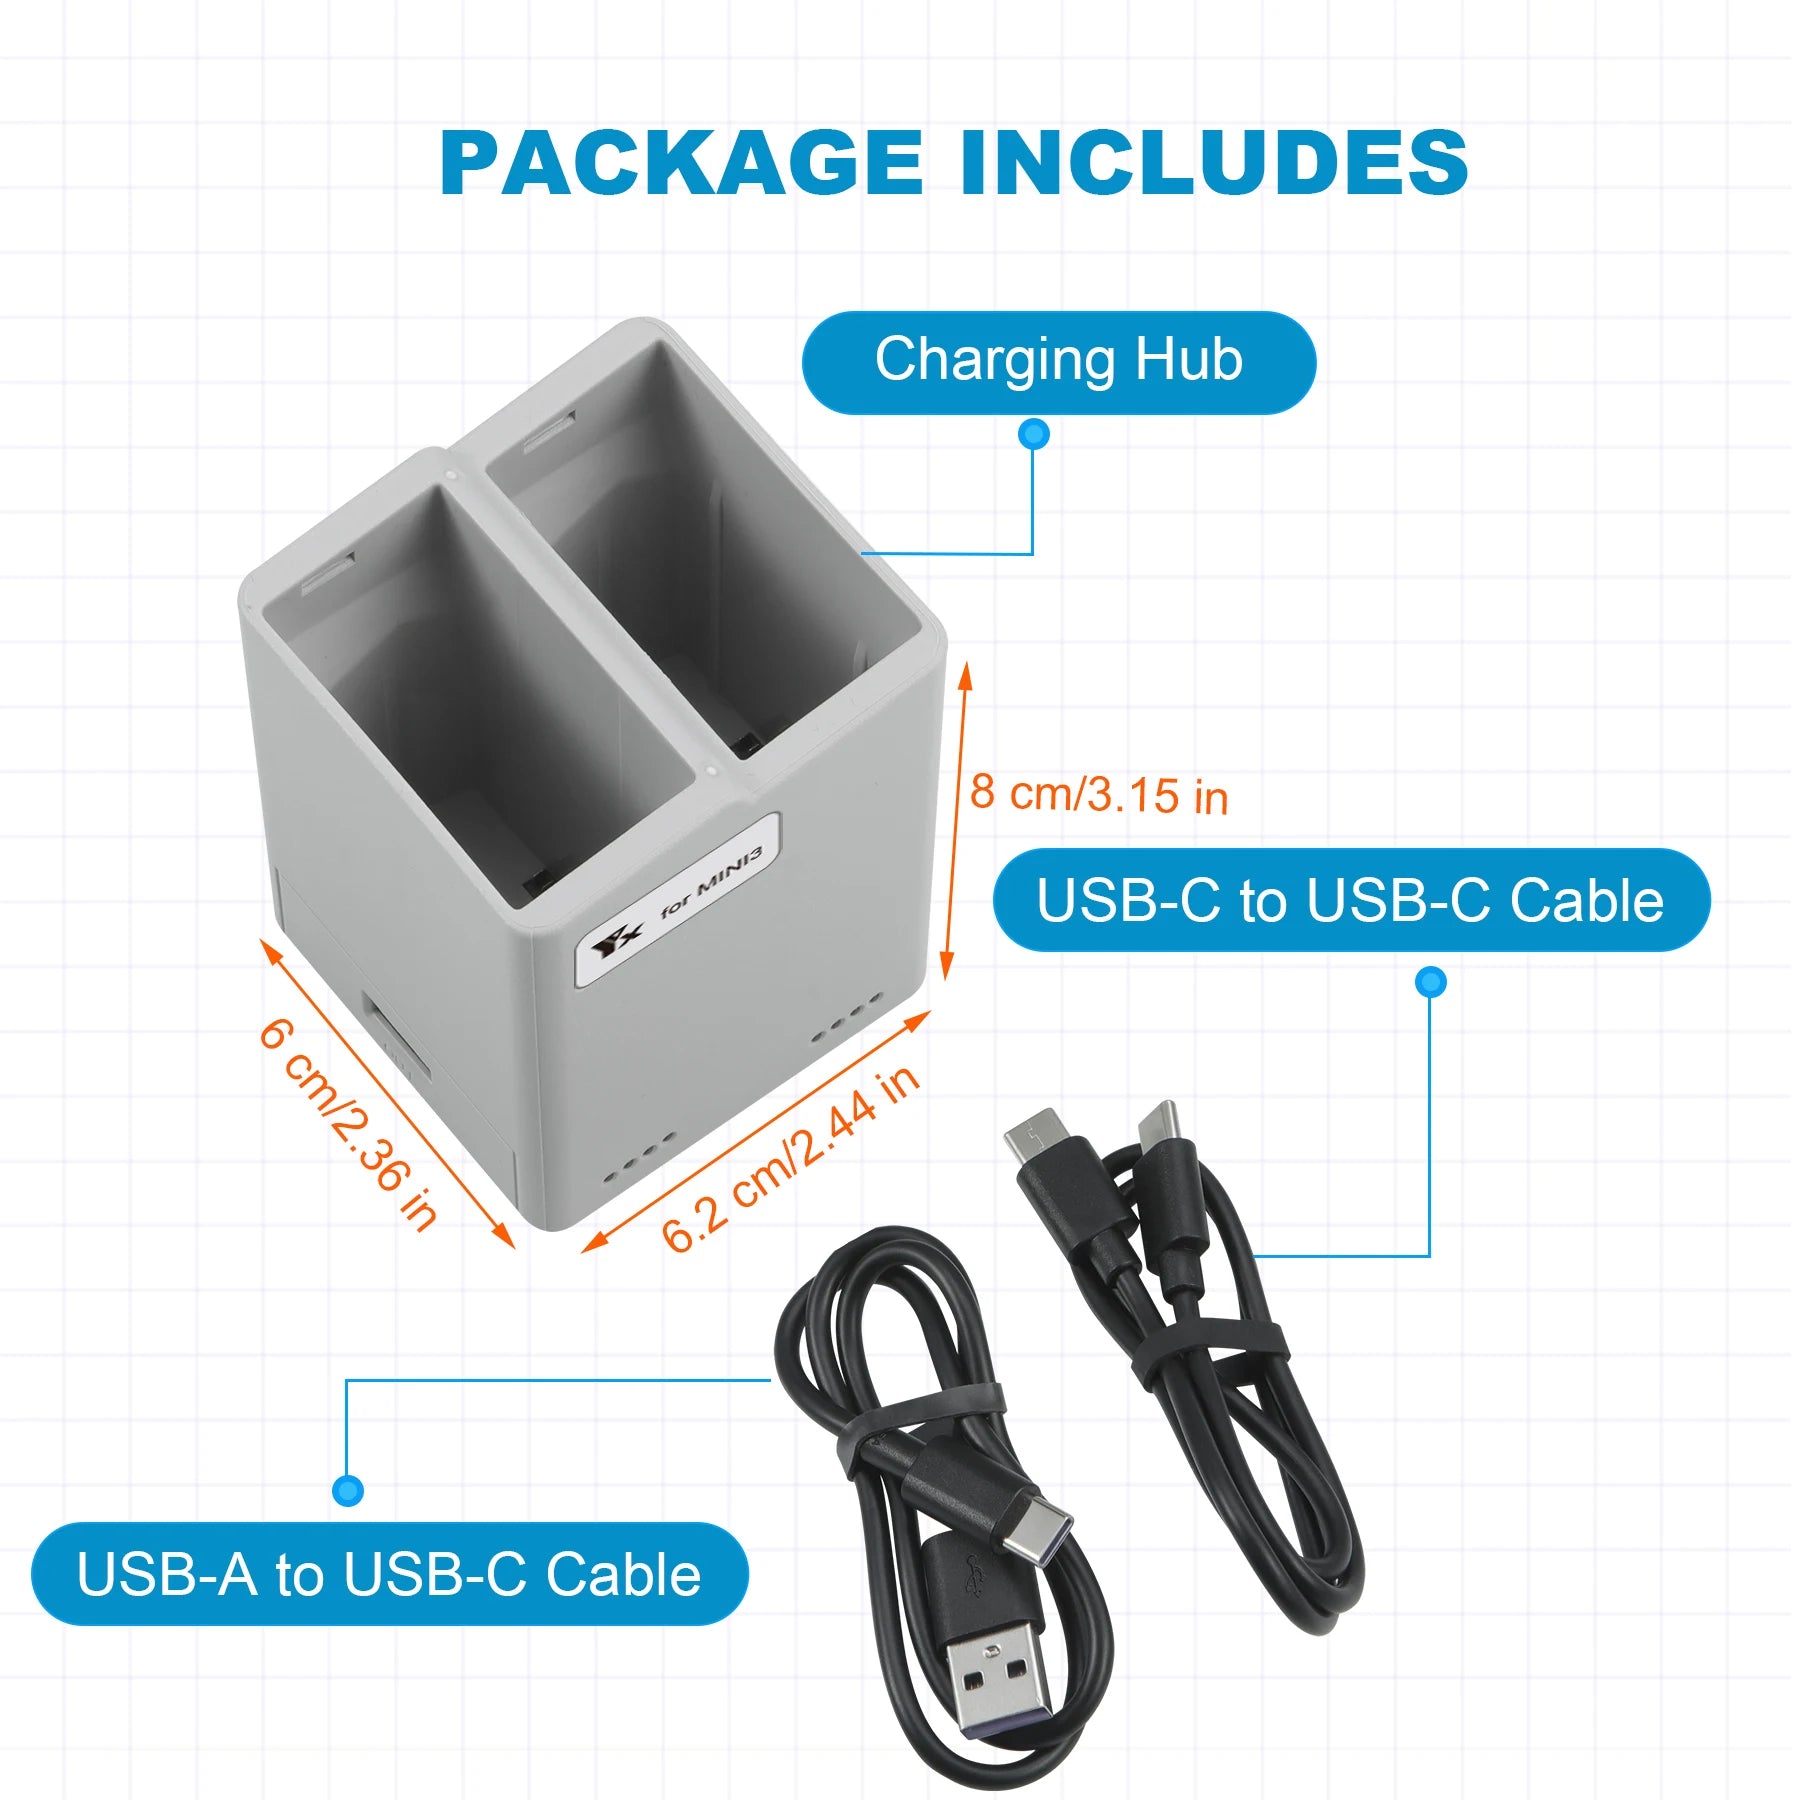 PACKAGE INCLUDES Charging Hub cm/3.15 in USB-C to USB